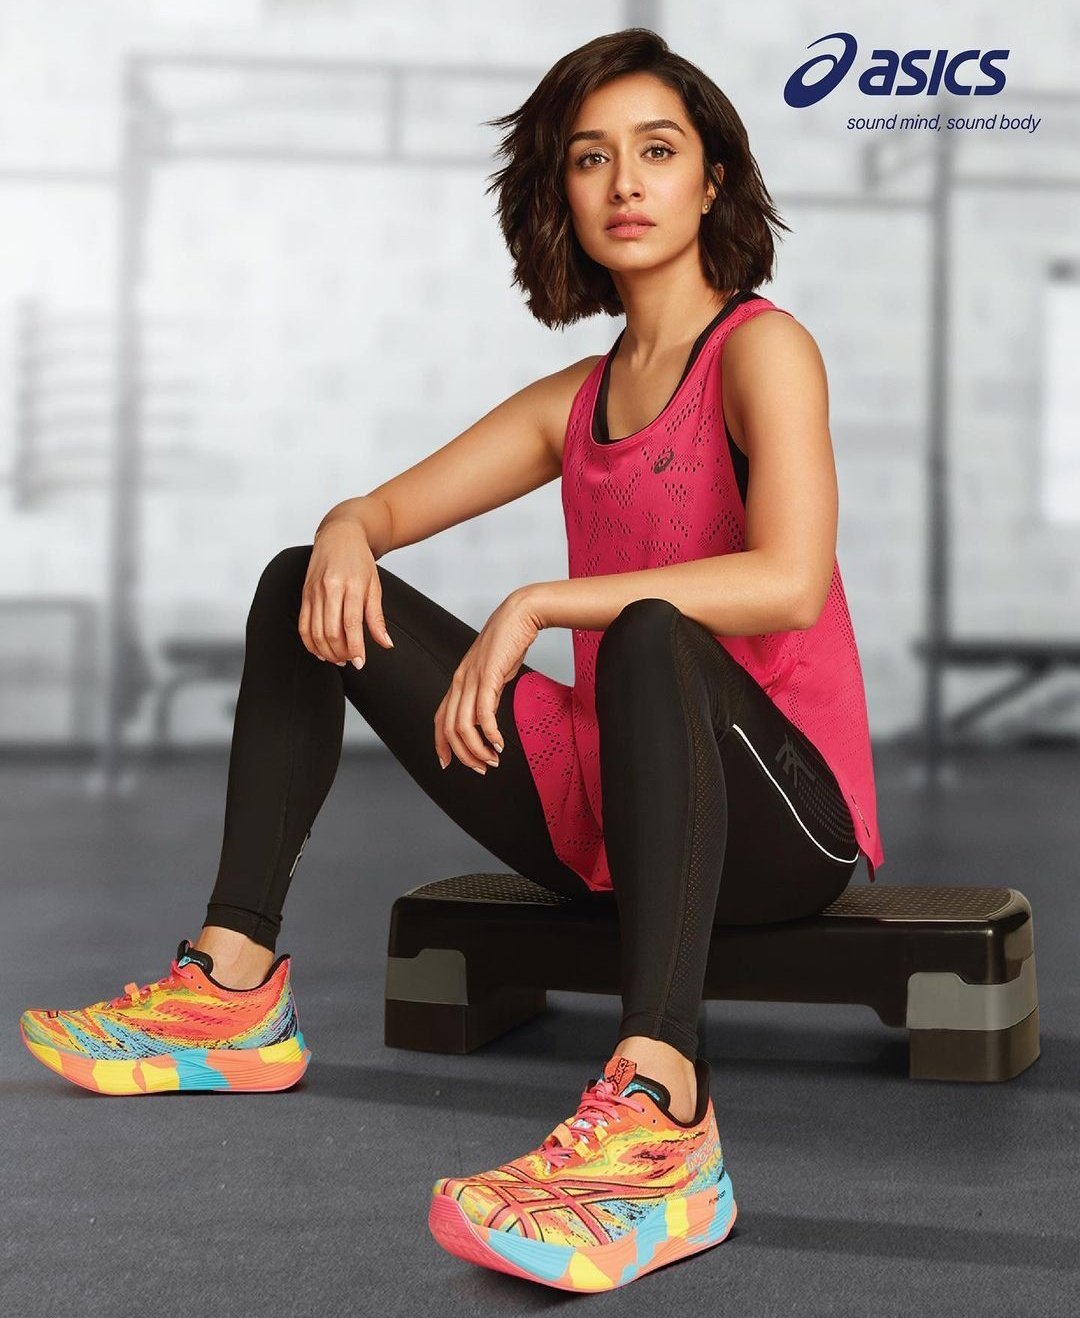 Shraddha Kapoor Appointed As ASICS Brand Ambassador Promoting Fitness